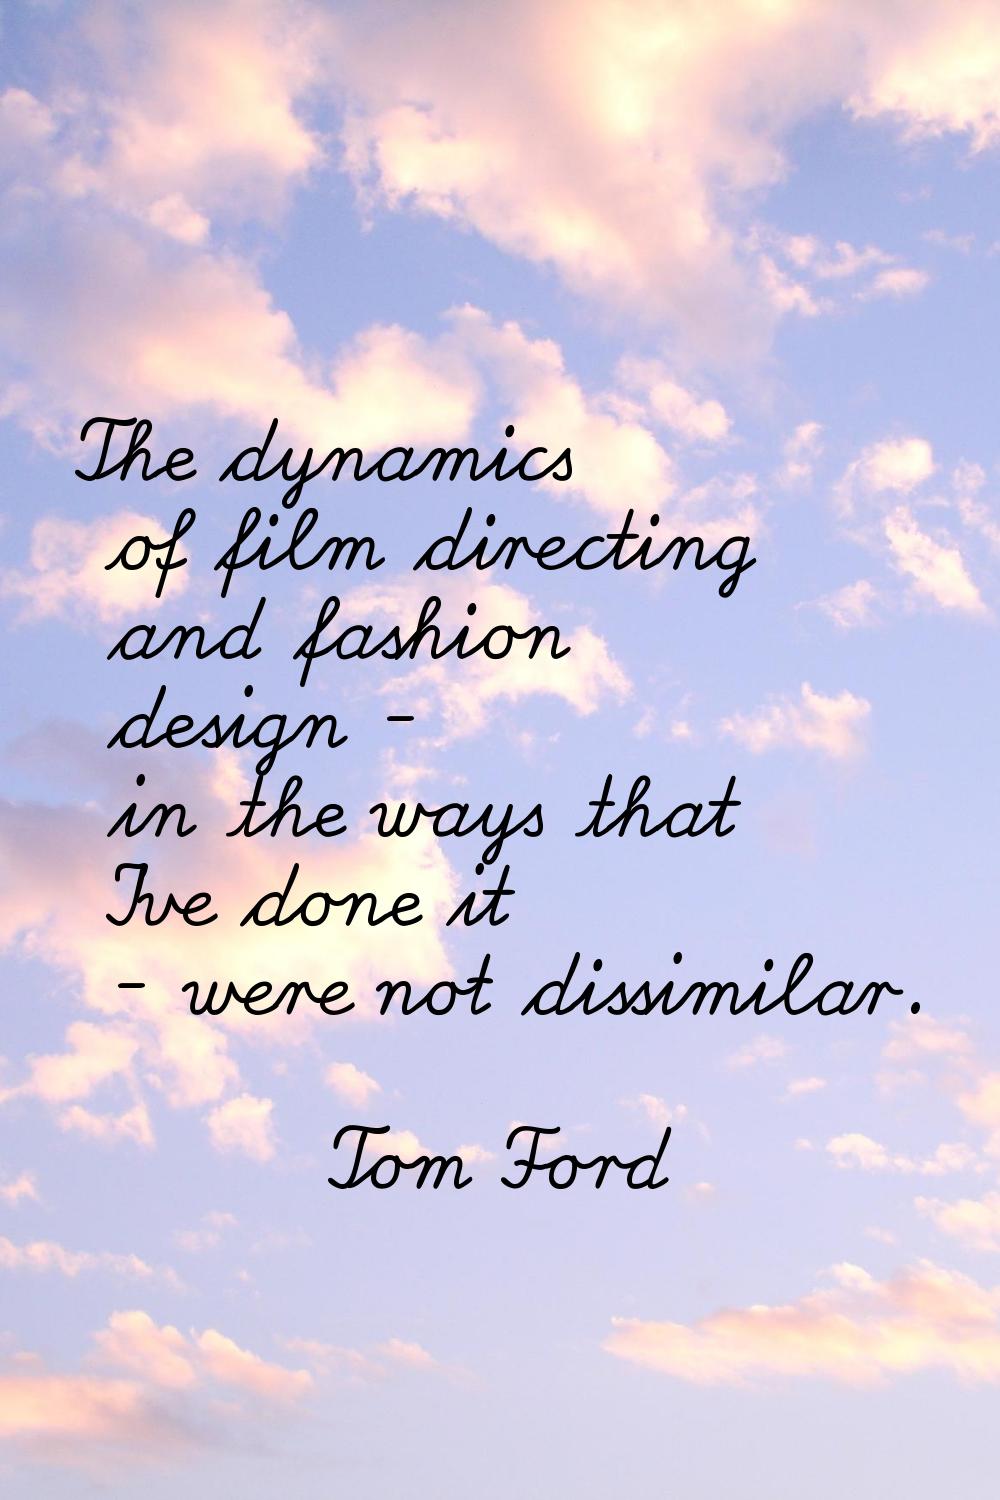 The dynamics of film directing and fashion design - in the ways that I've done it - were not dissim